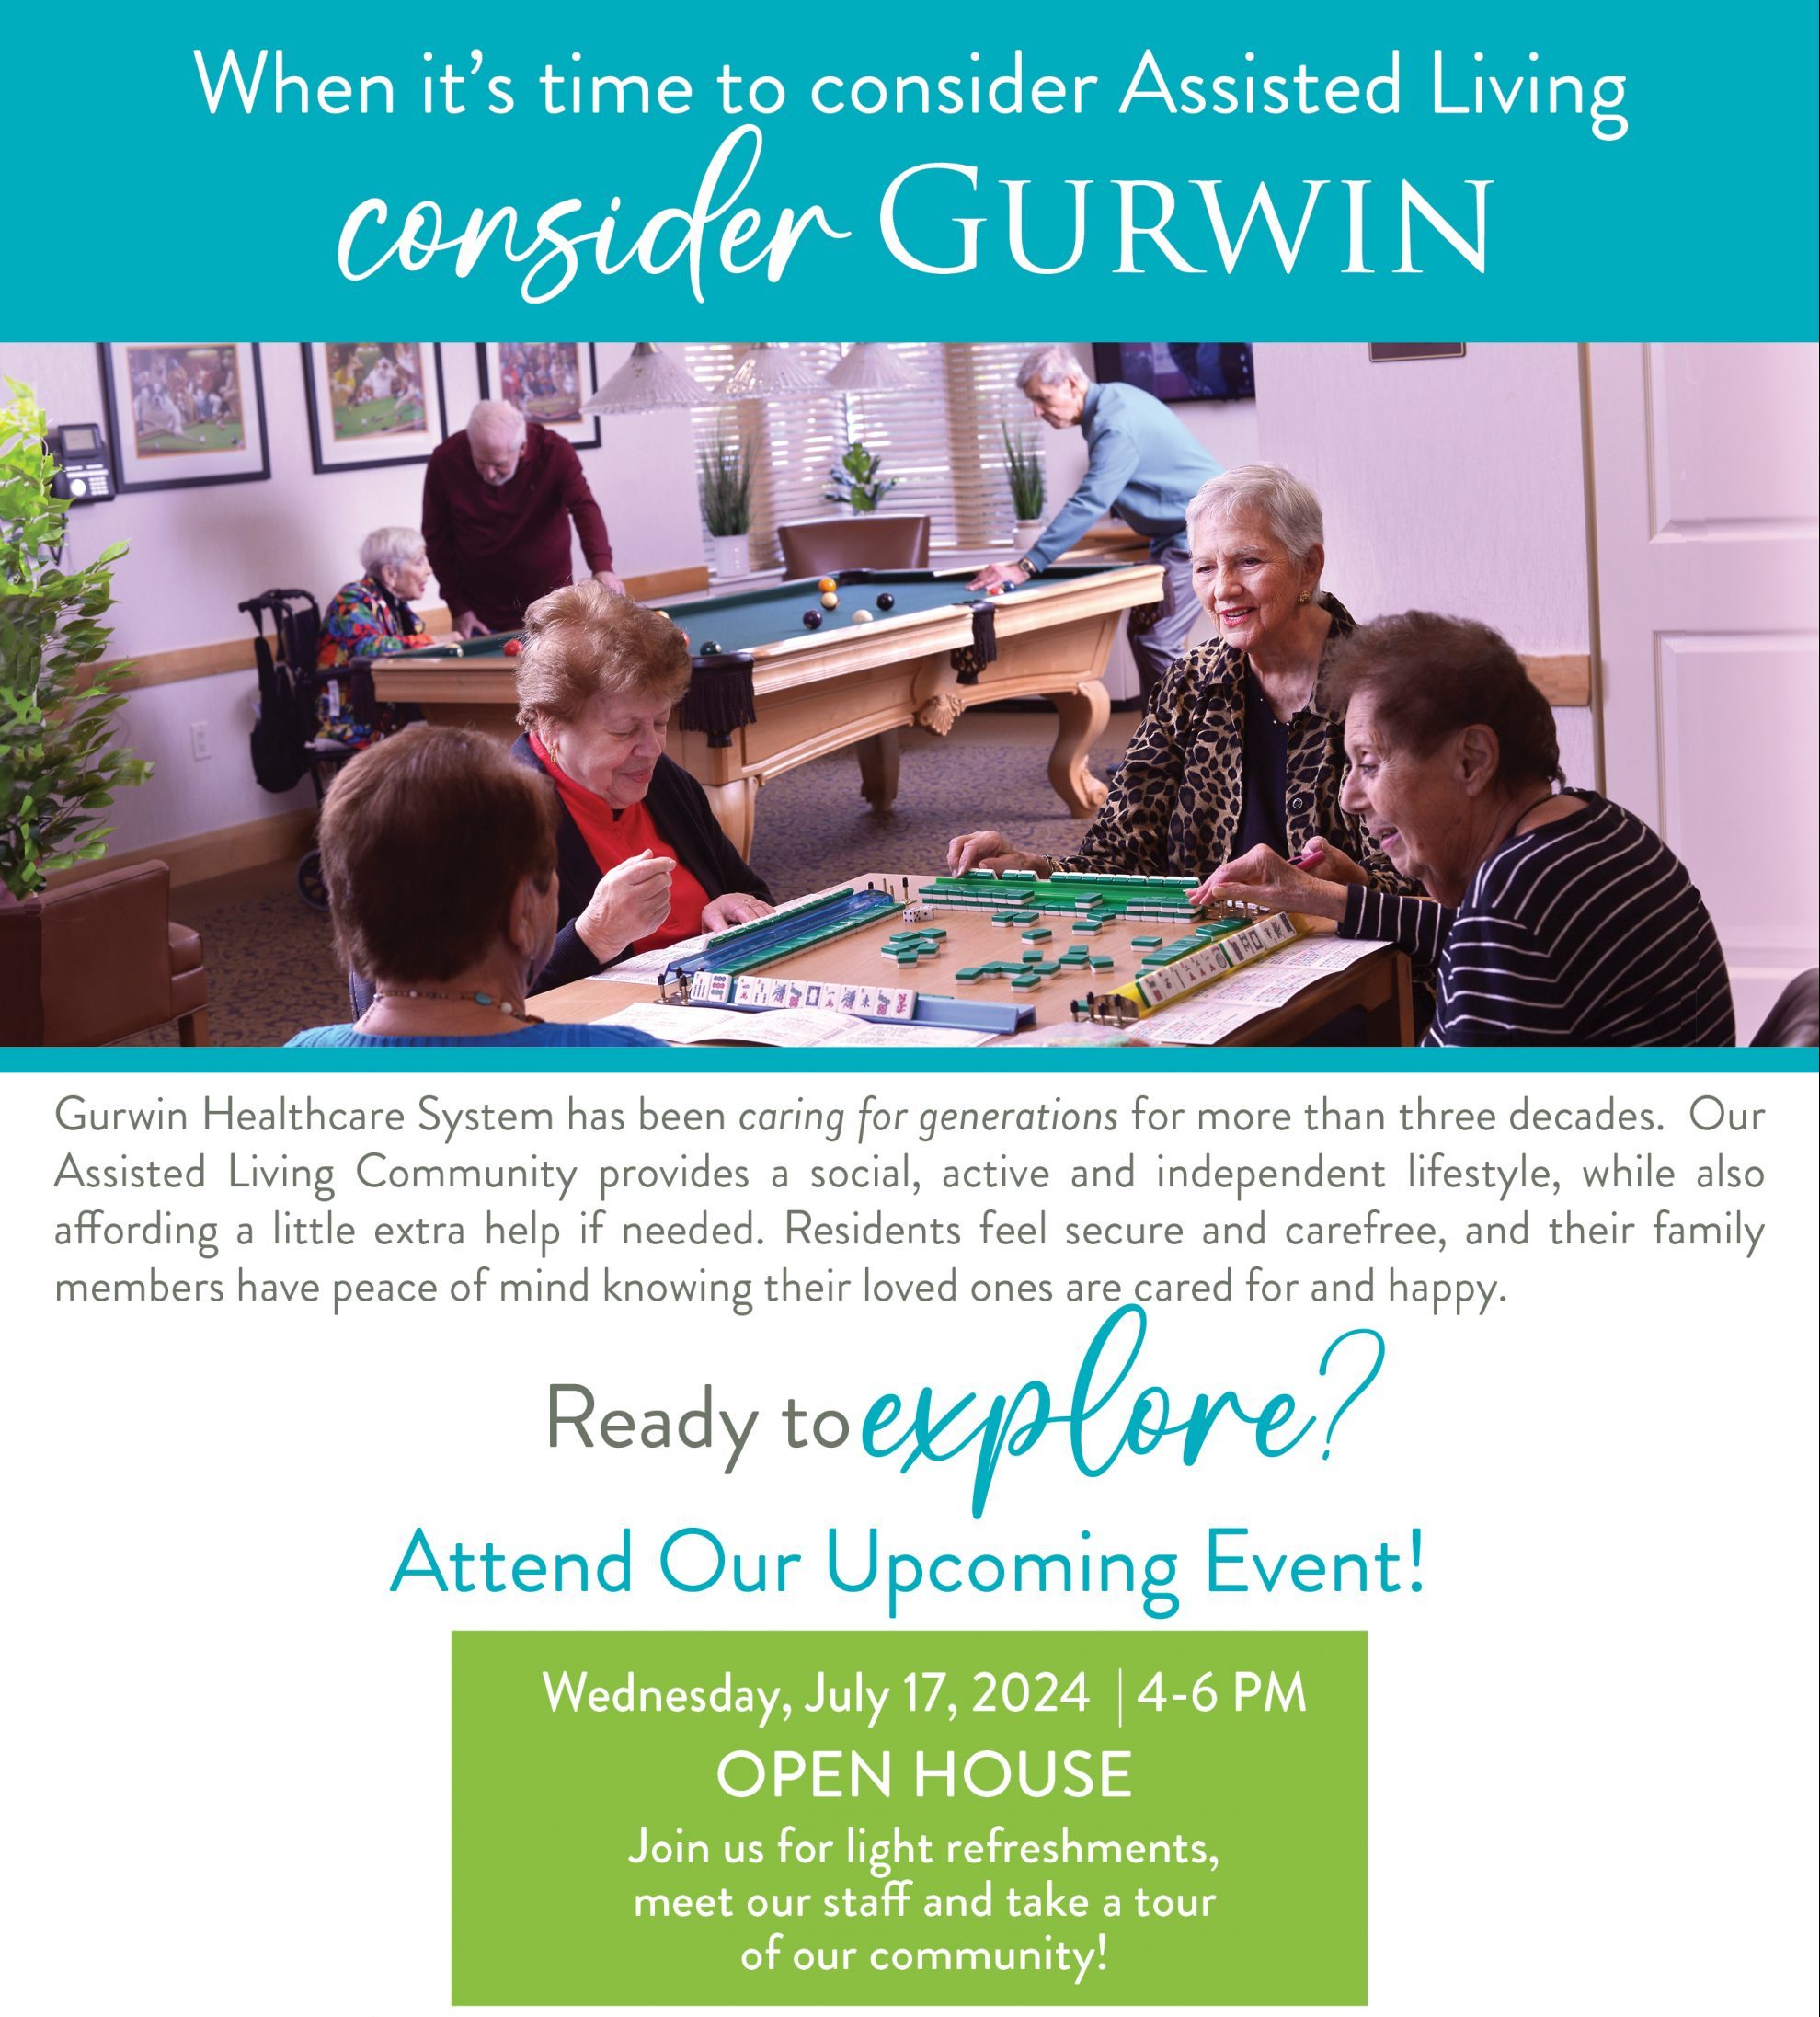 Come to our Open House and tour Long Island's Best Assisted Living Community!